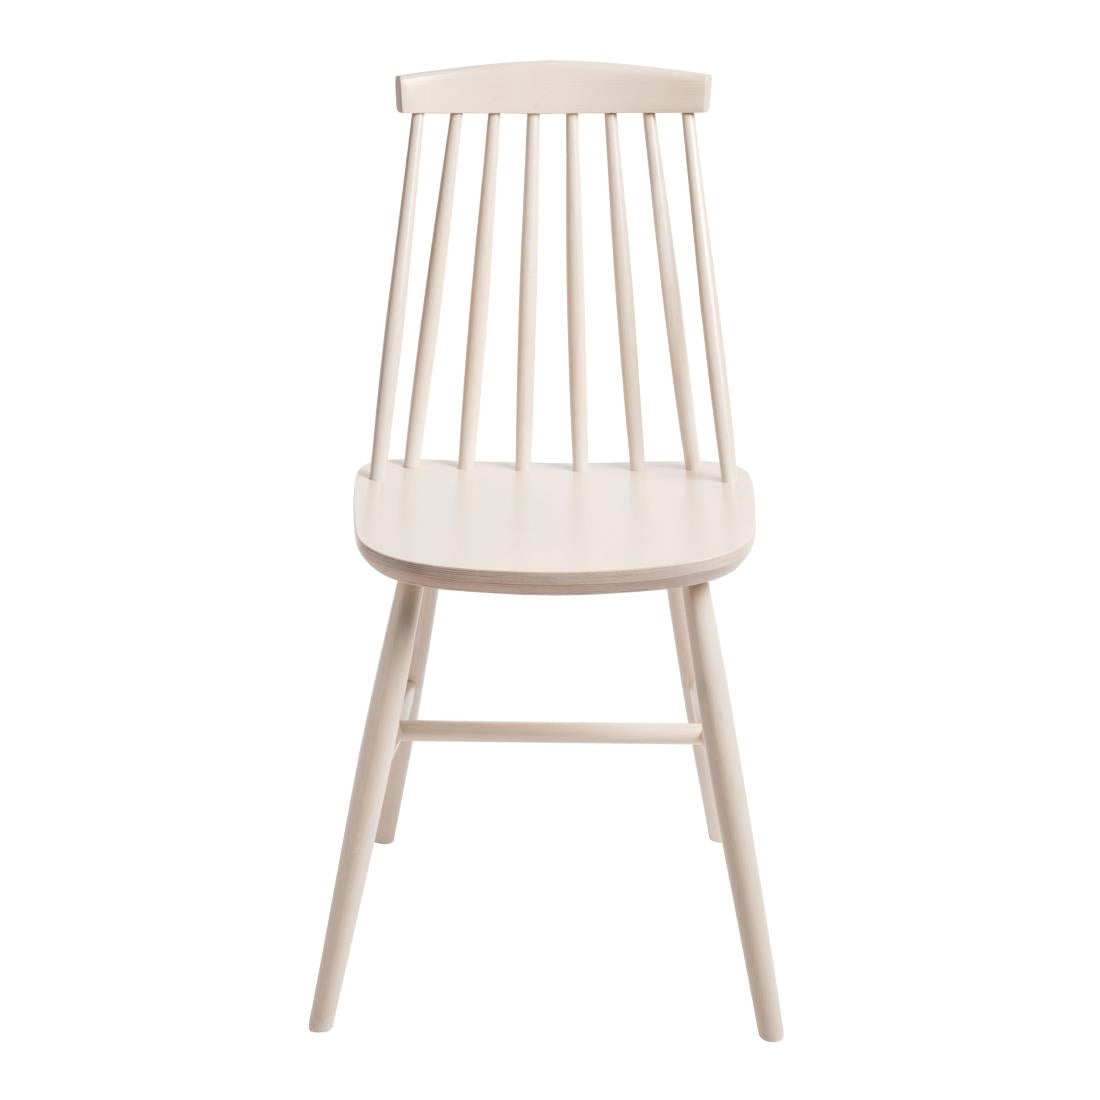 DC354 Fameg Farmhouse Angled Side Chairs White (Pack of 2) JD Catering Equipment Solutions Ltd